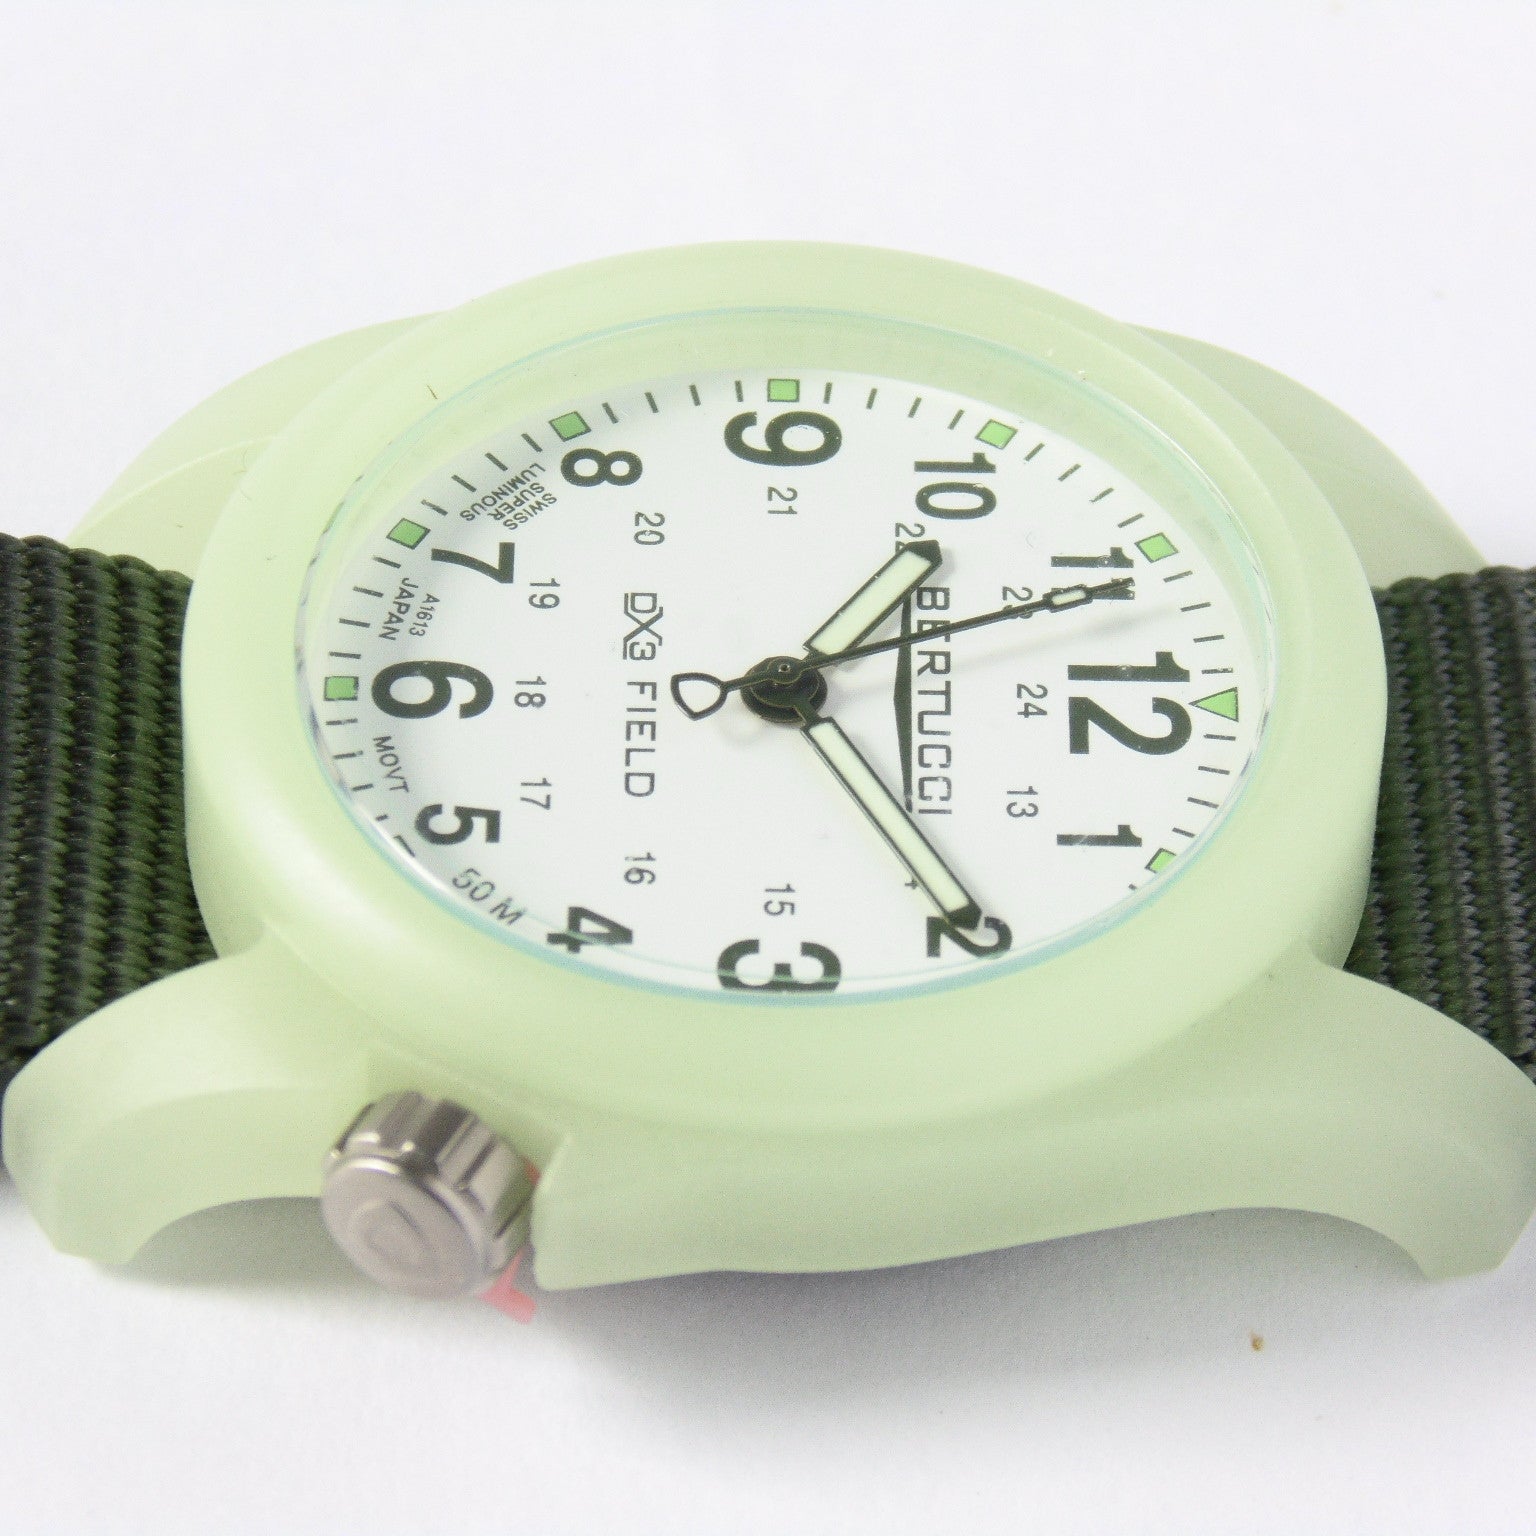 Bertucci DX3 Luminous Resin Watch, Olive Green Nylon Strap, White Dial - 11028 - Watchfinder General - UK suppliers of Russian Vostok Parnis Watches MWC G10
 - 4